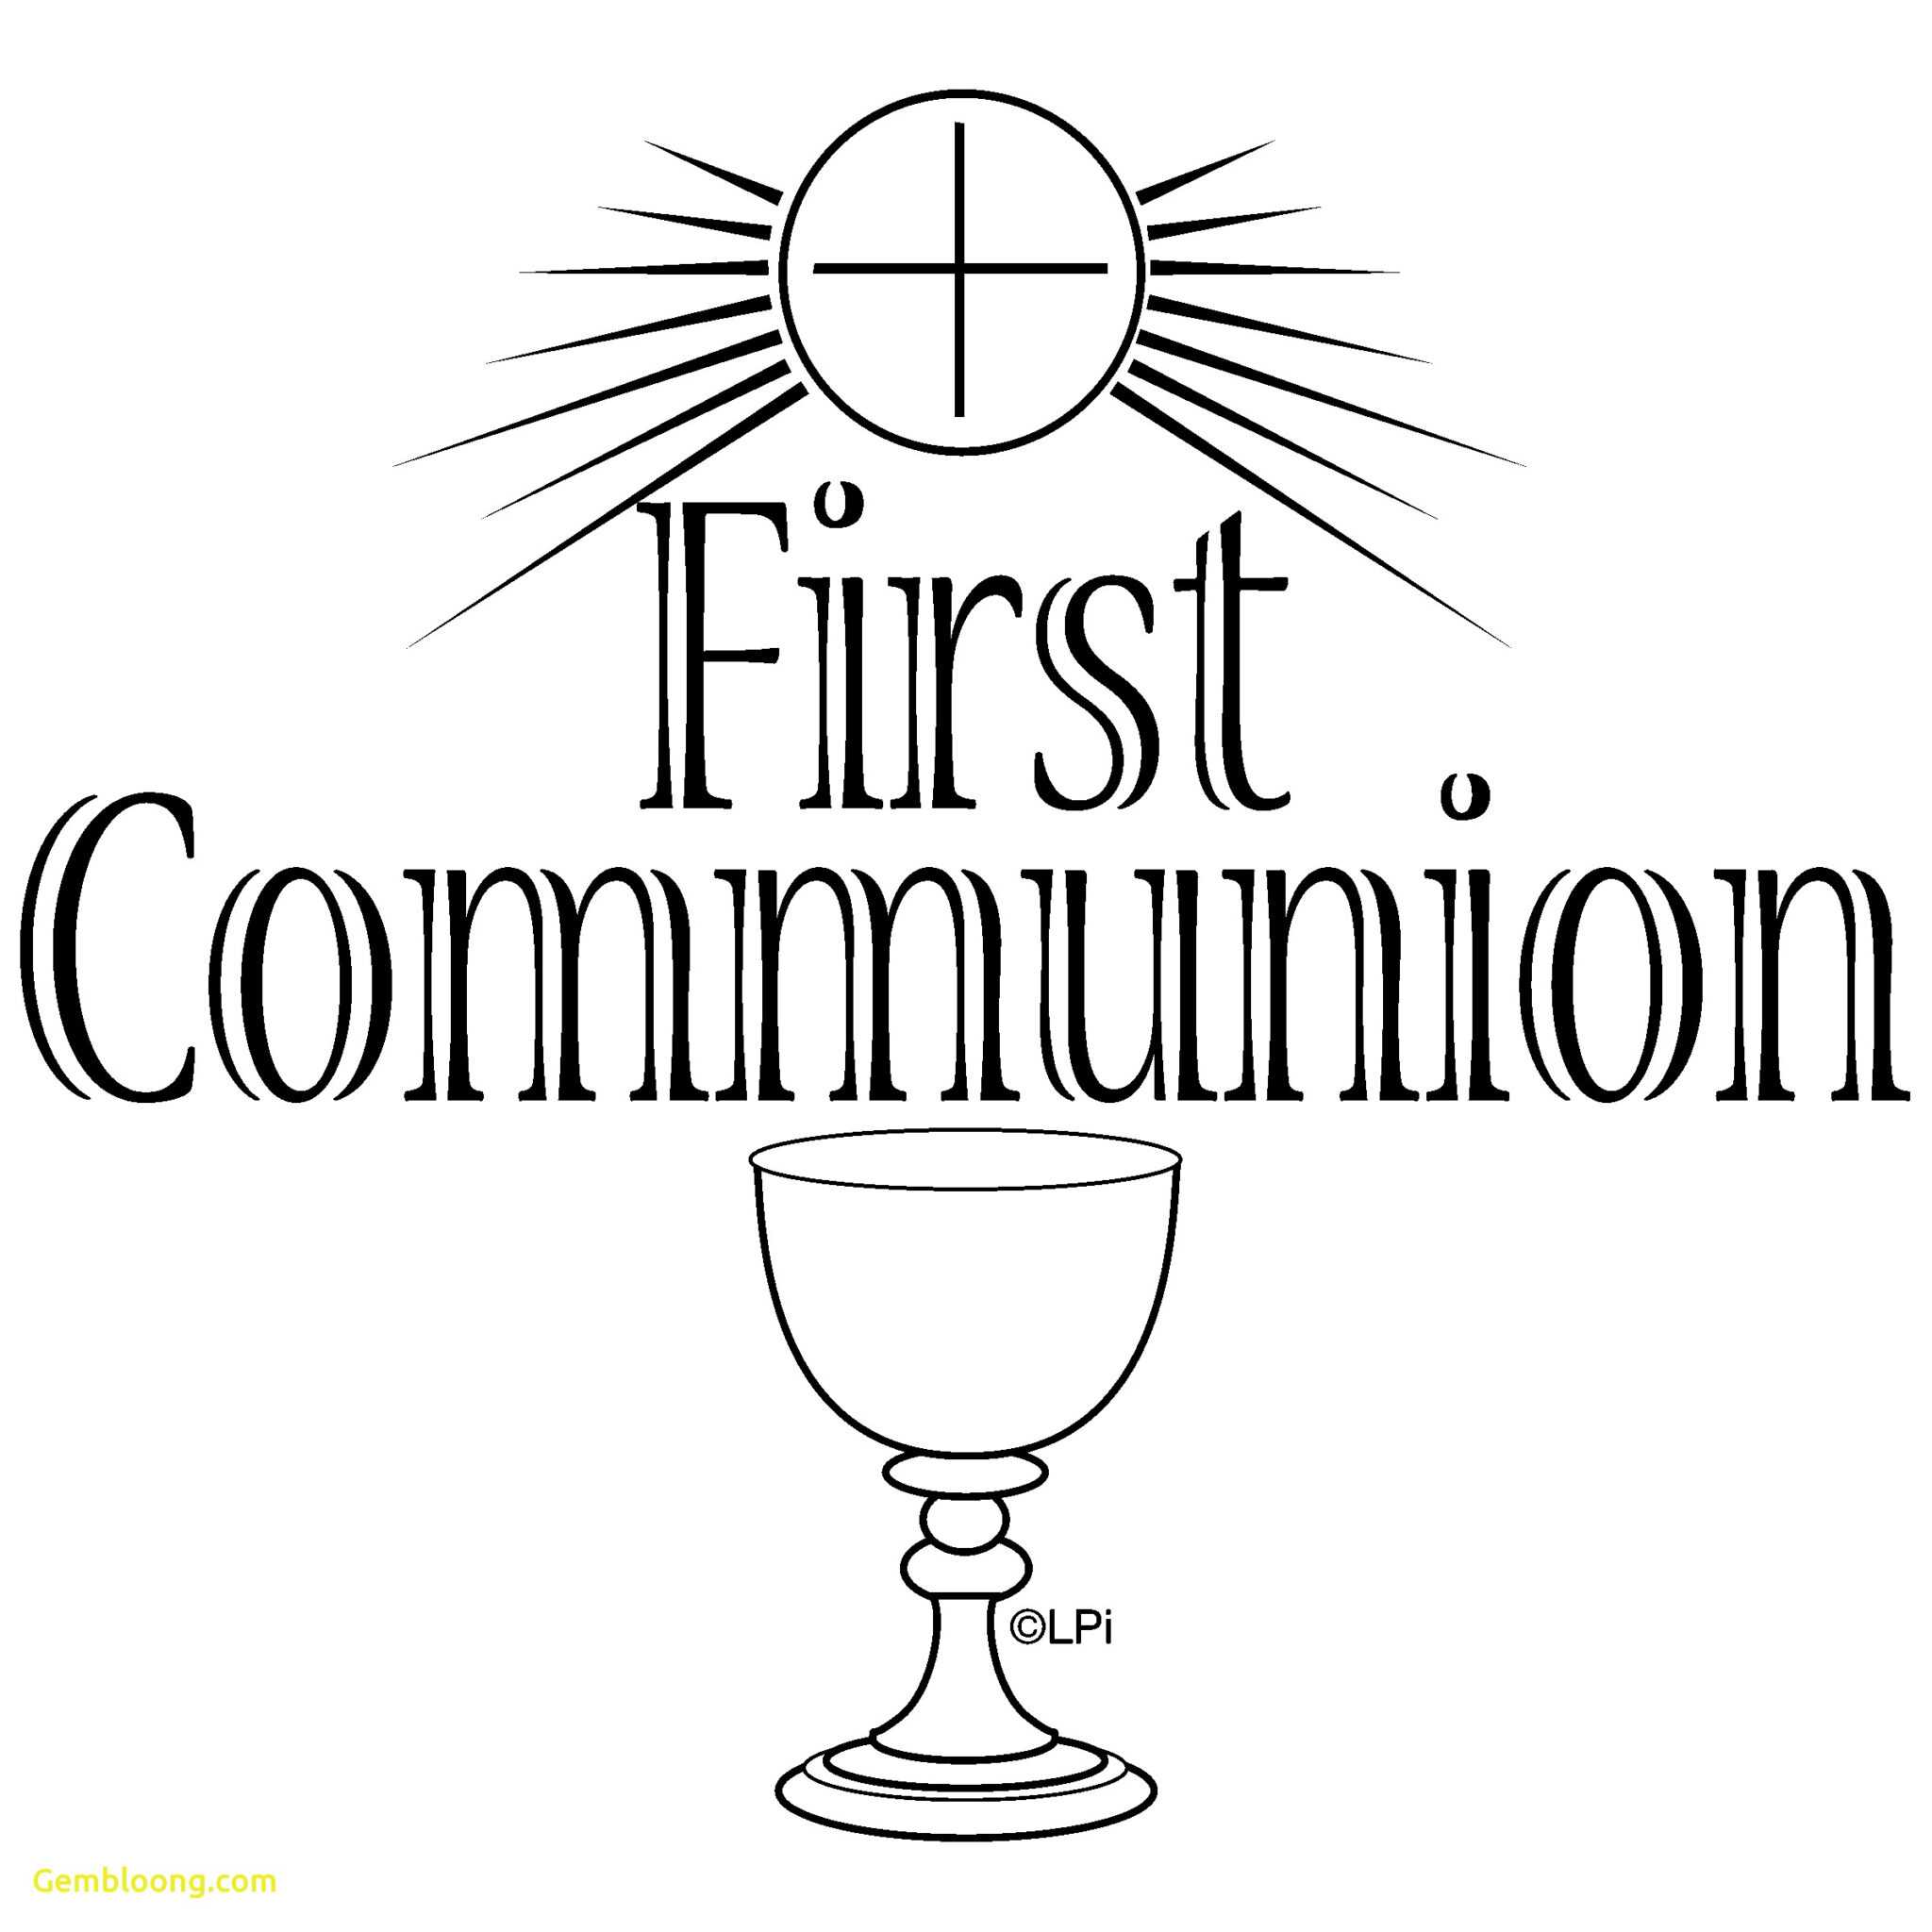 first-communion-template-free-vector-art-25-free-downloads-intended